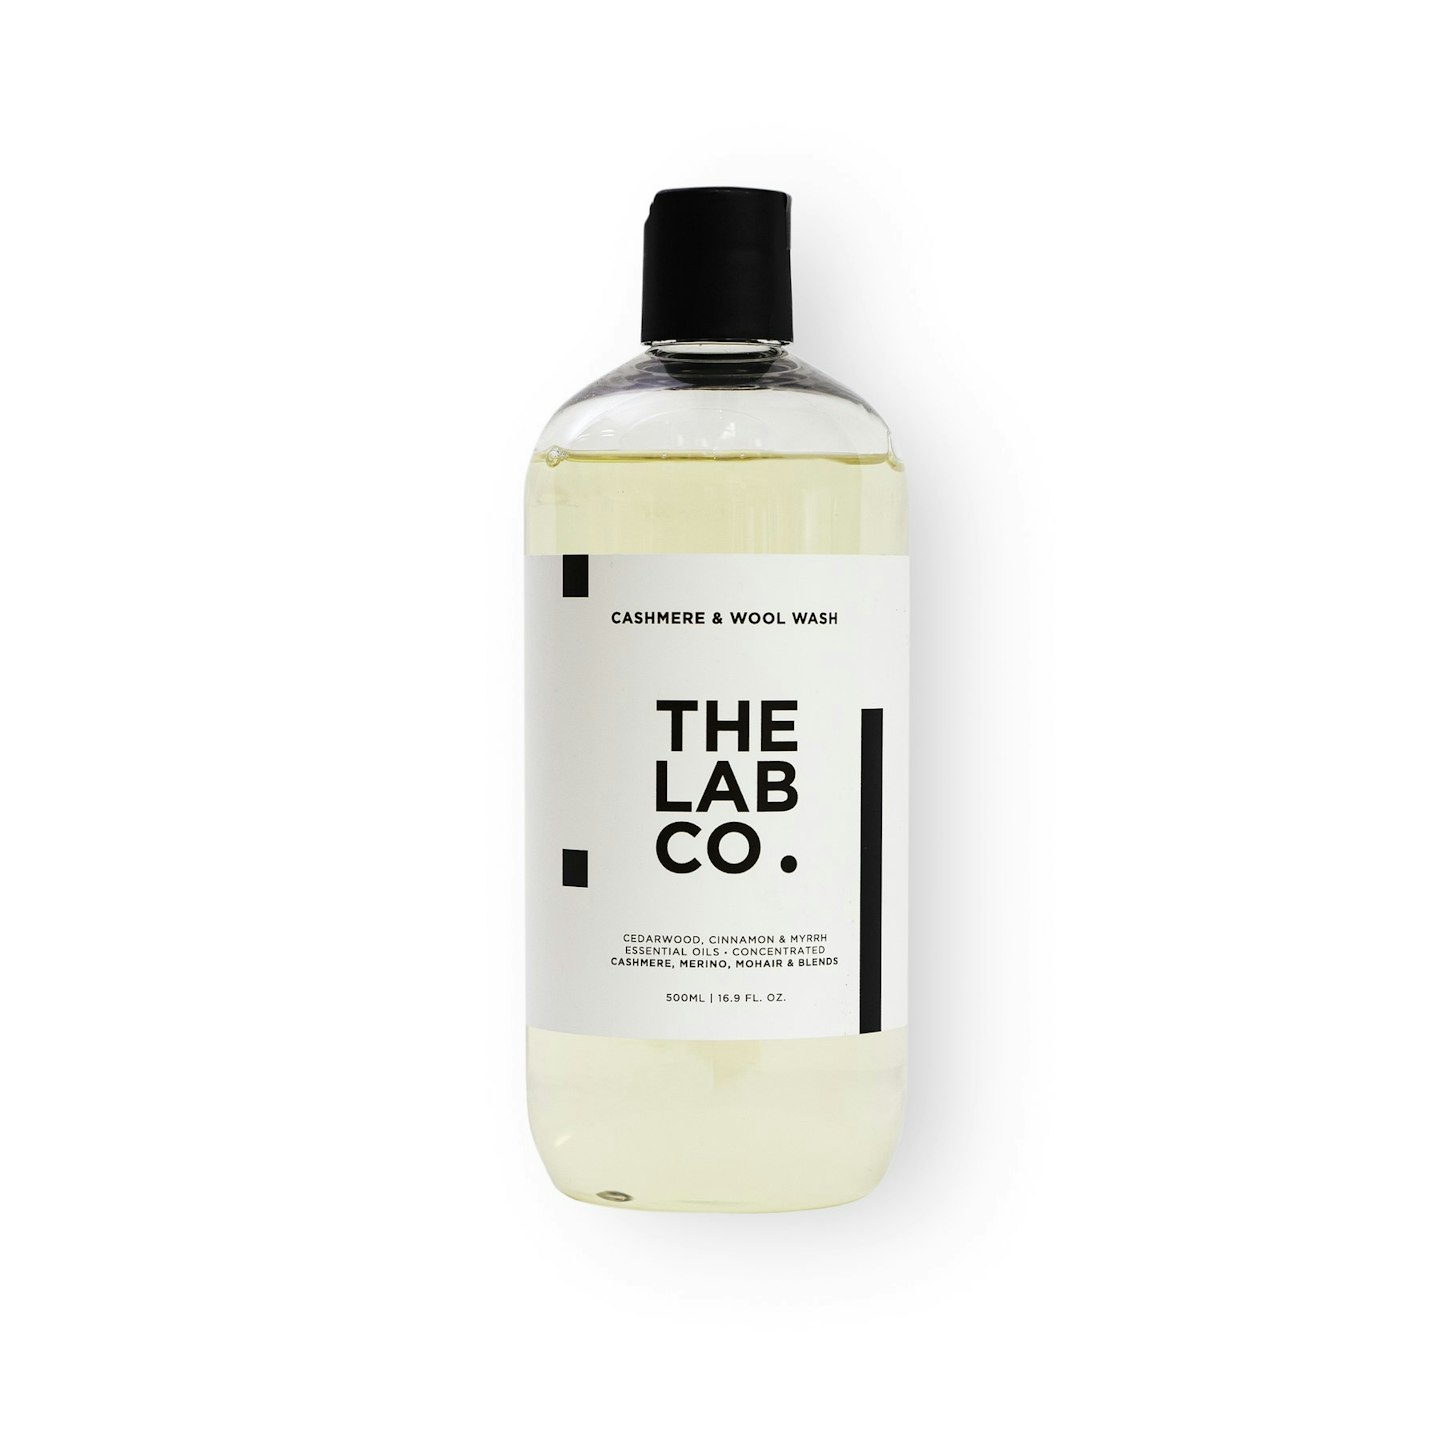 The Lab Co, Cashmere & Wool Wash, £14